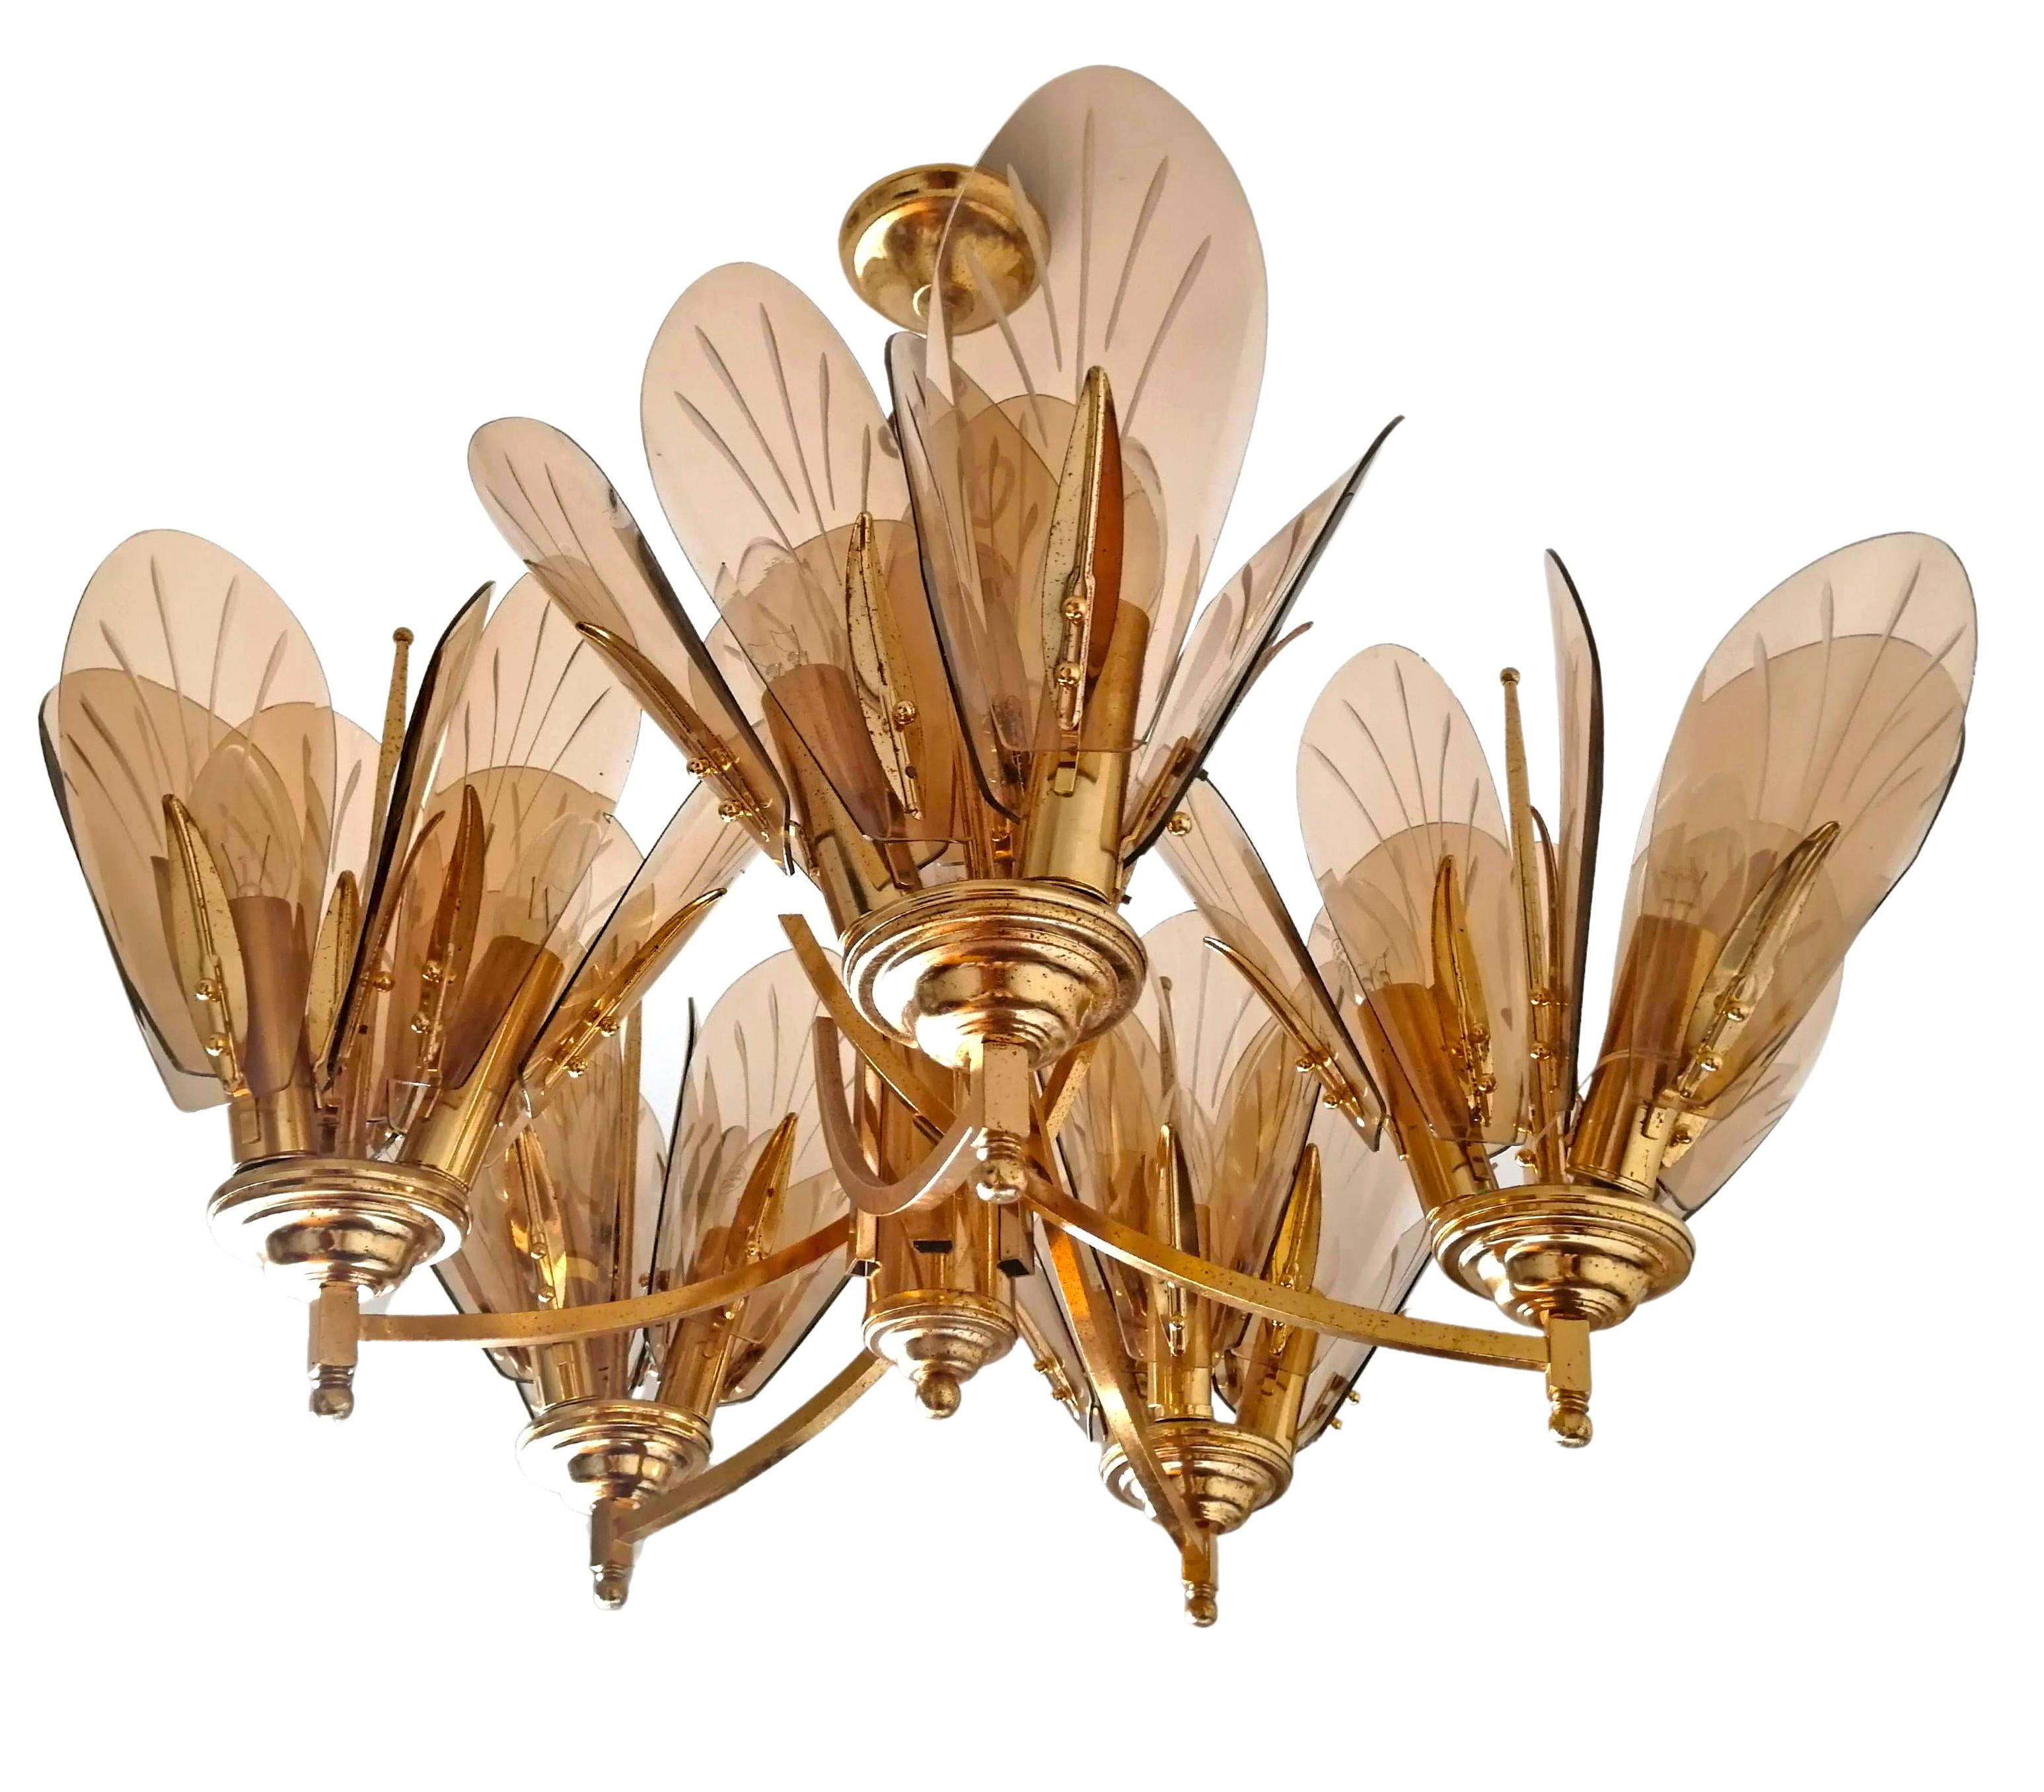 Fabulous Mid-Century Modern chandelier from the 1970s in the style of Fontana Arte. It holds 15 candelabra sockets.
Vintage condition, some patina to the brass and a few flea bites on glass consistent with age and use.

Dimensions
Height: 31.5